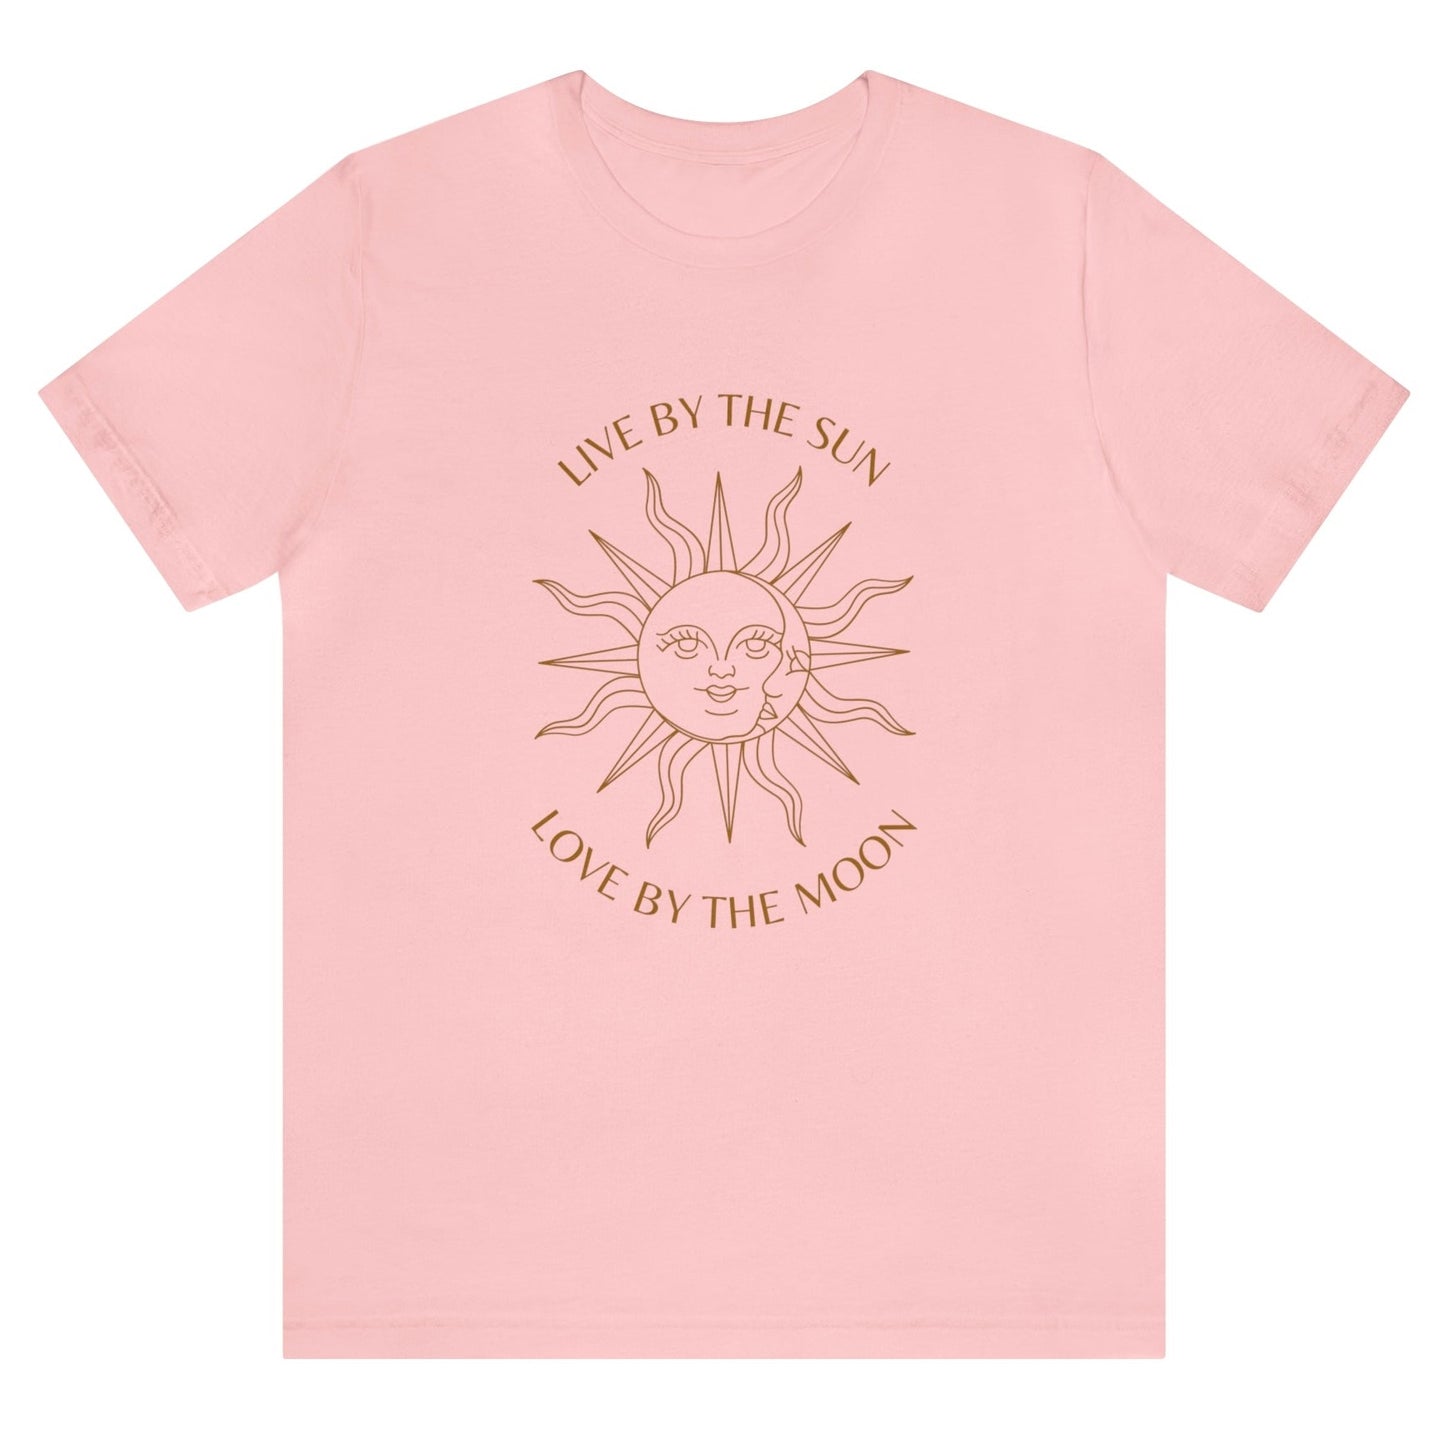 live-by-the-sun-love-by-the-moon-pink-t-shirt-with-sun-and-moon-design